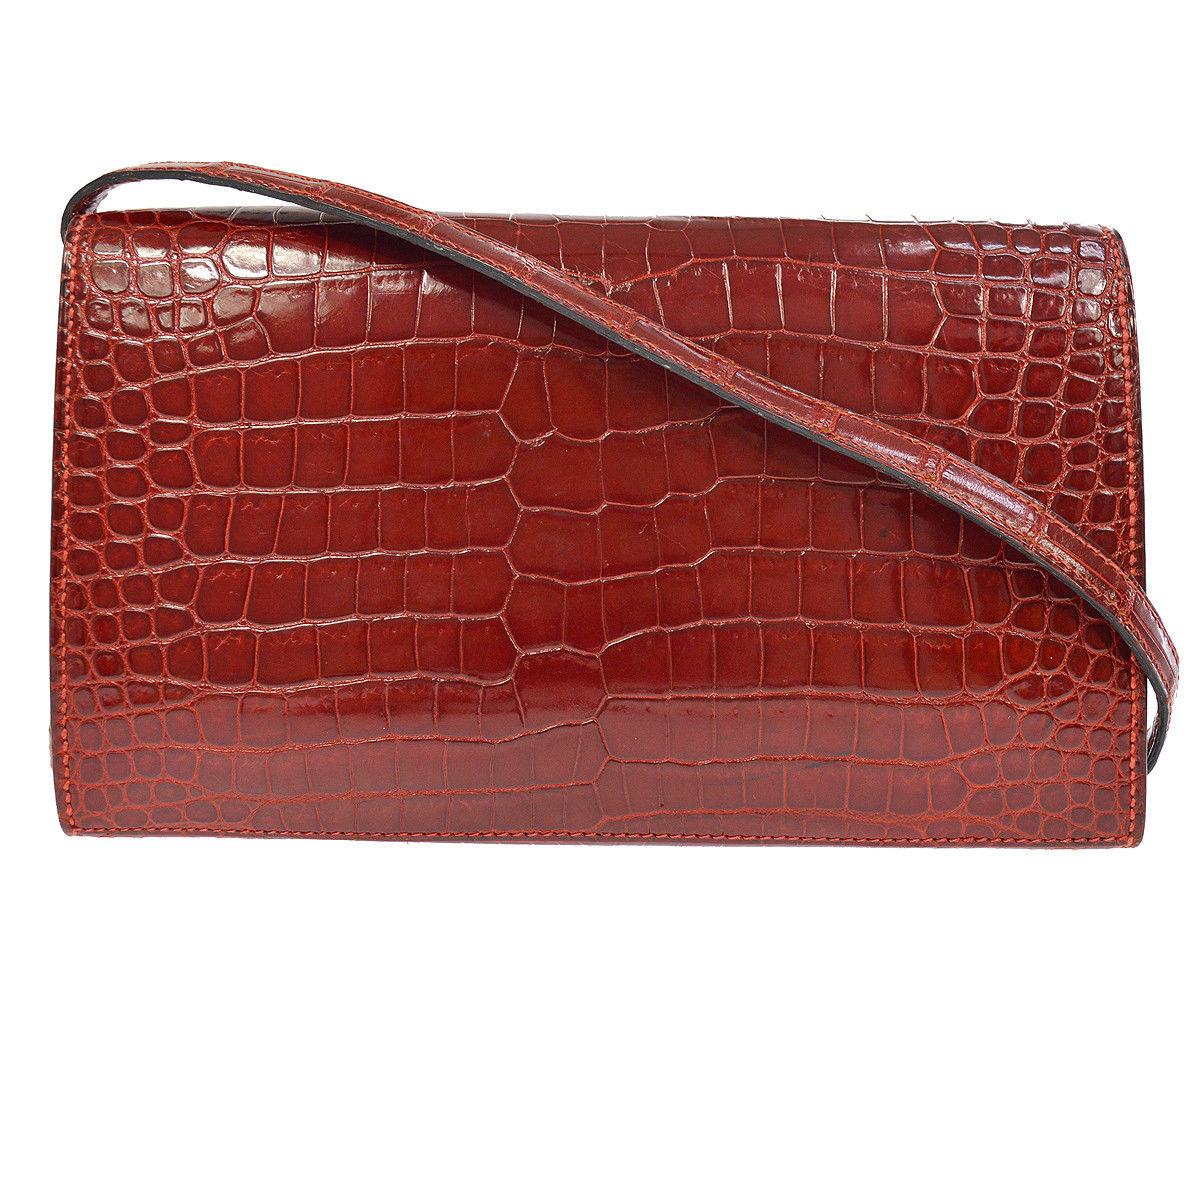 Brown Hermes Red Crocodile Leather Gold 2 in 1 Evening Clutch Shoulder Flap Bag in Box